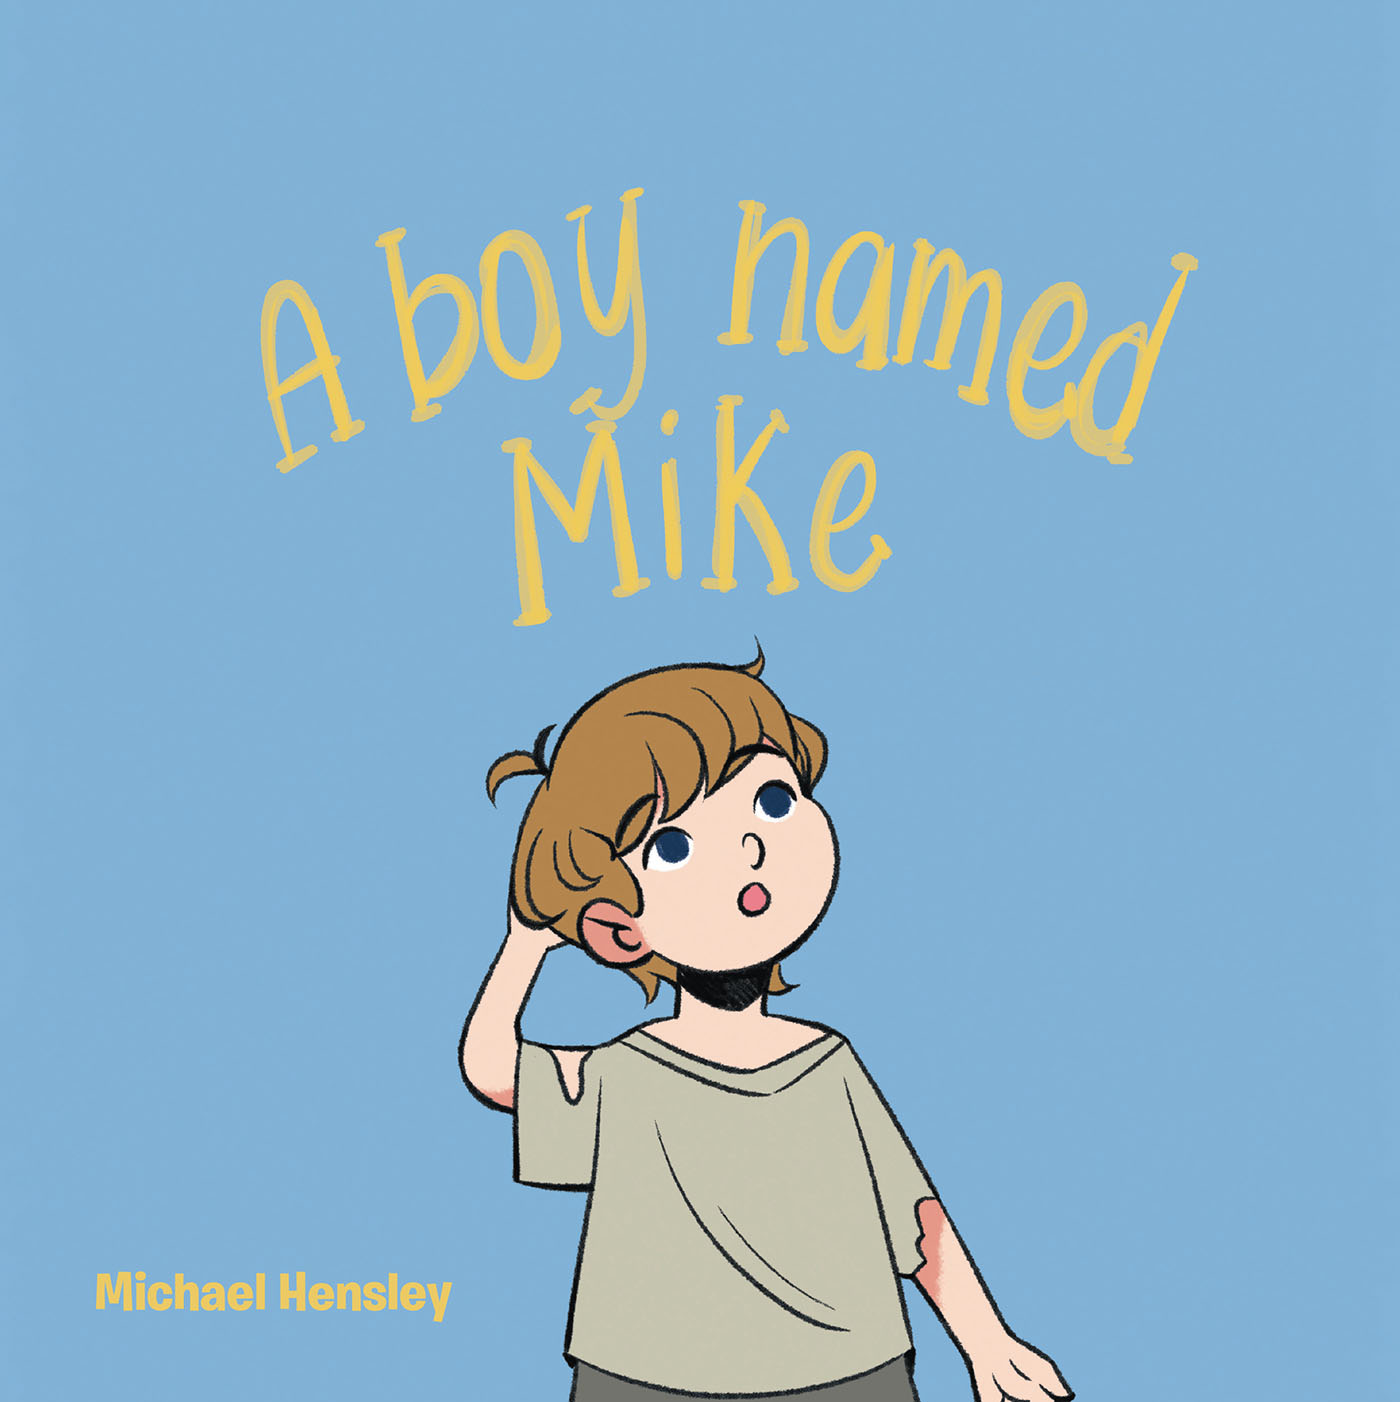 Author Michael Hensley’s New Book, “A boy named Mike,” is a Triumphant Story of Resilience and Perseverance in the Face of Adversity and Humble Beginnings